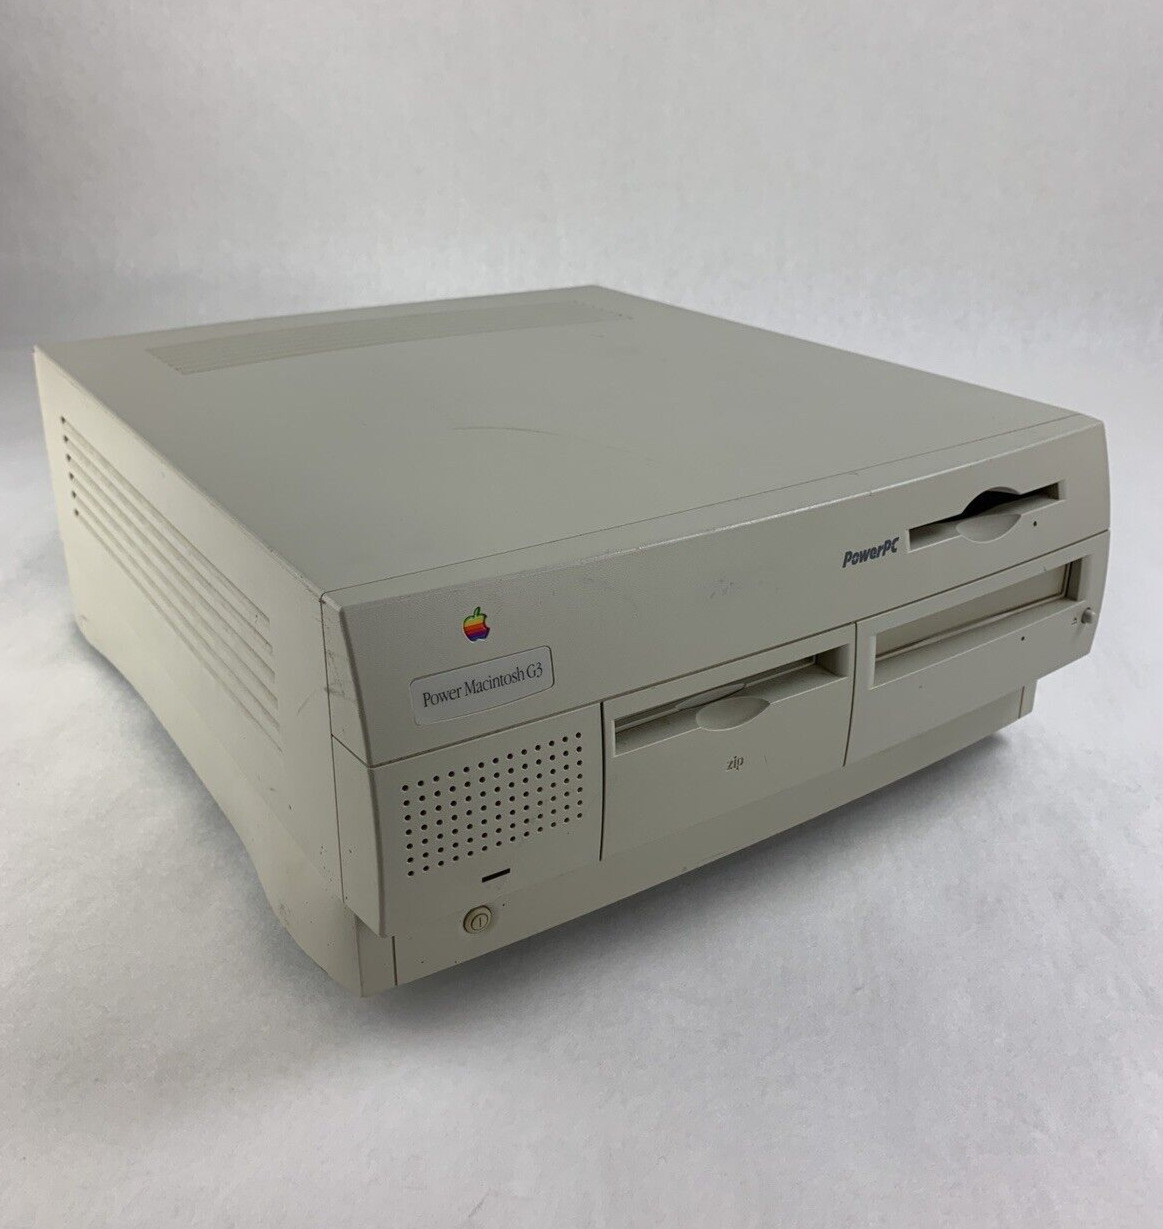 Vintage Apple Macintosh M3979 G3 Computer Tested and Boots No OS No HDD